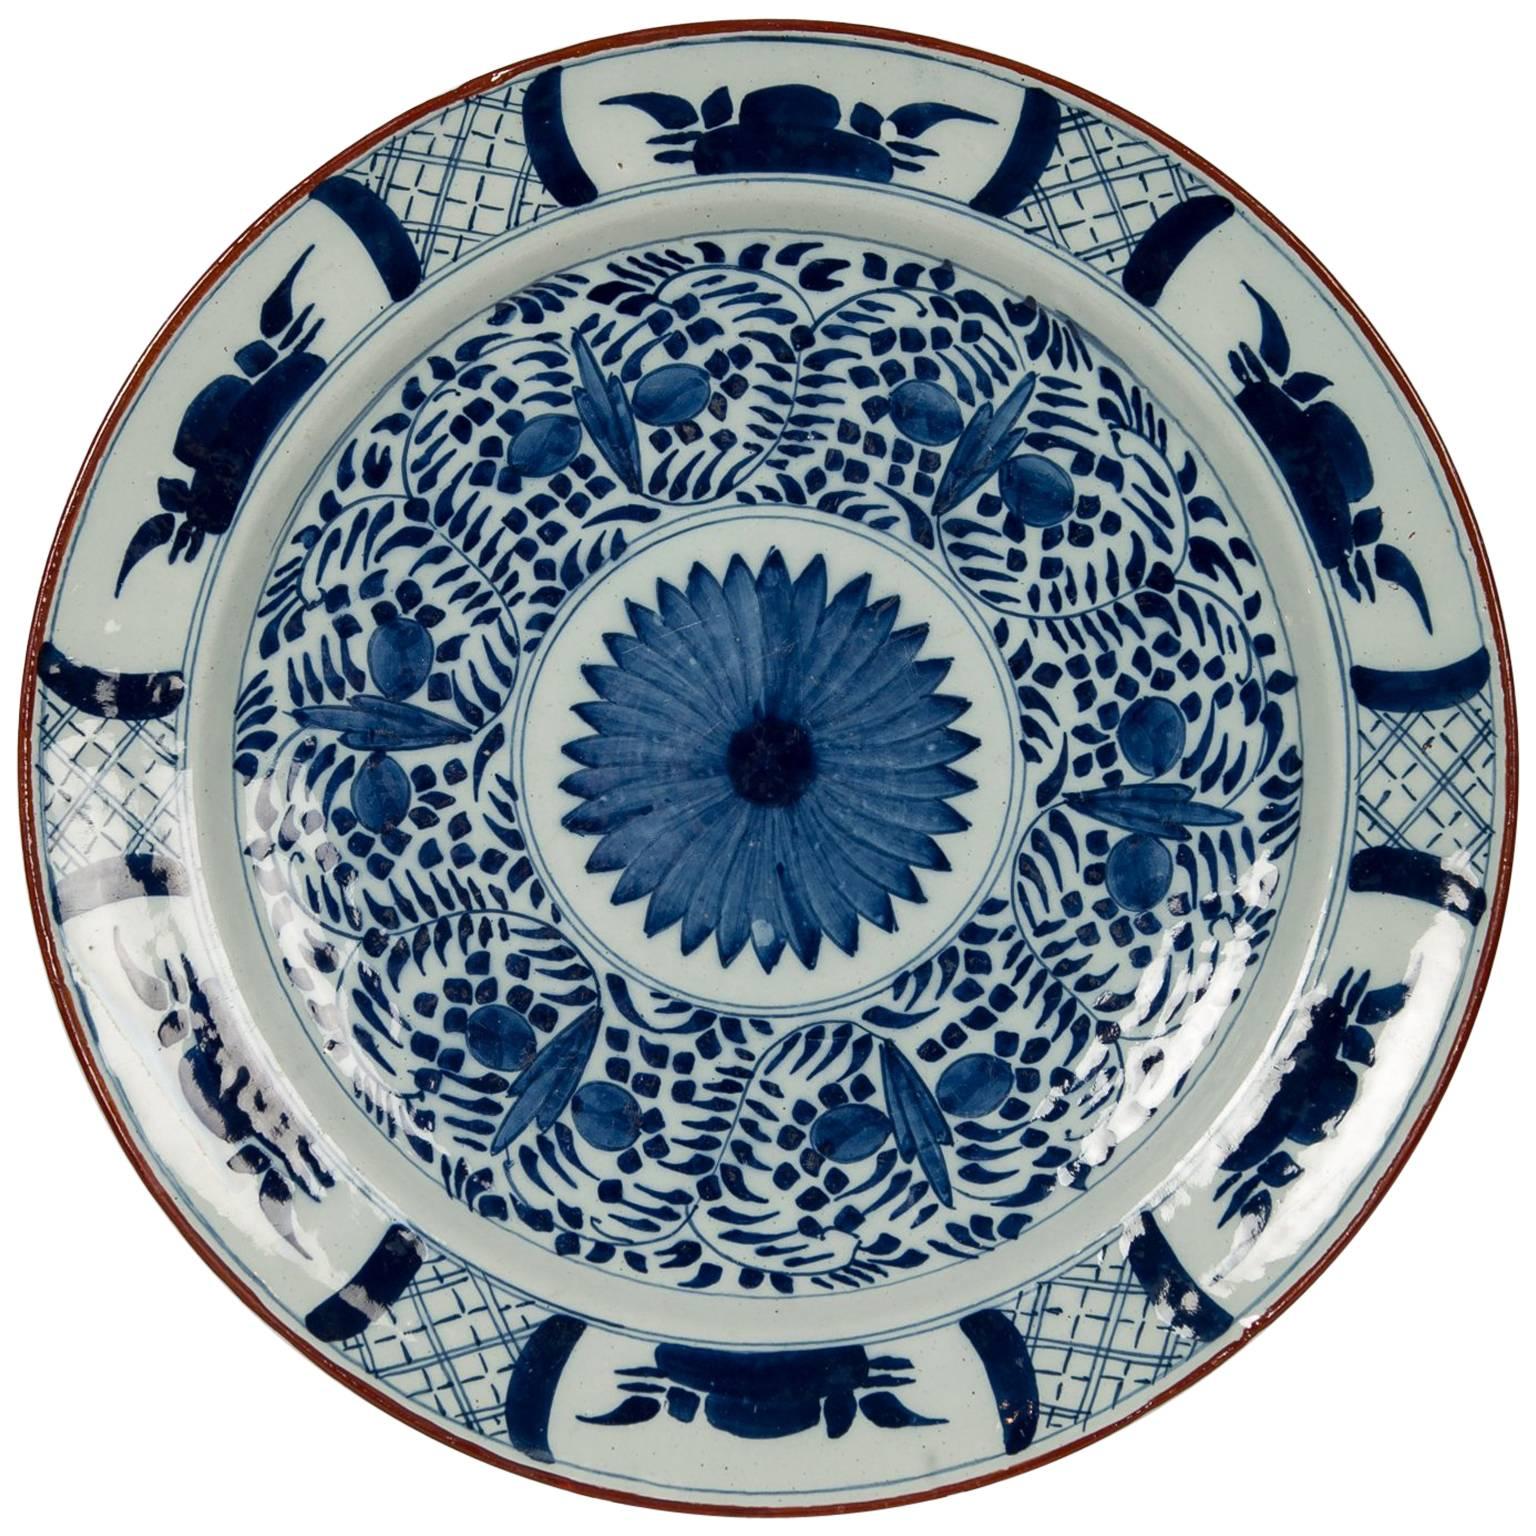 Blue and White Dutch Delft Charger